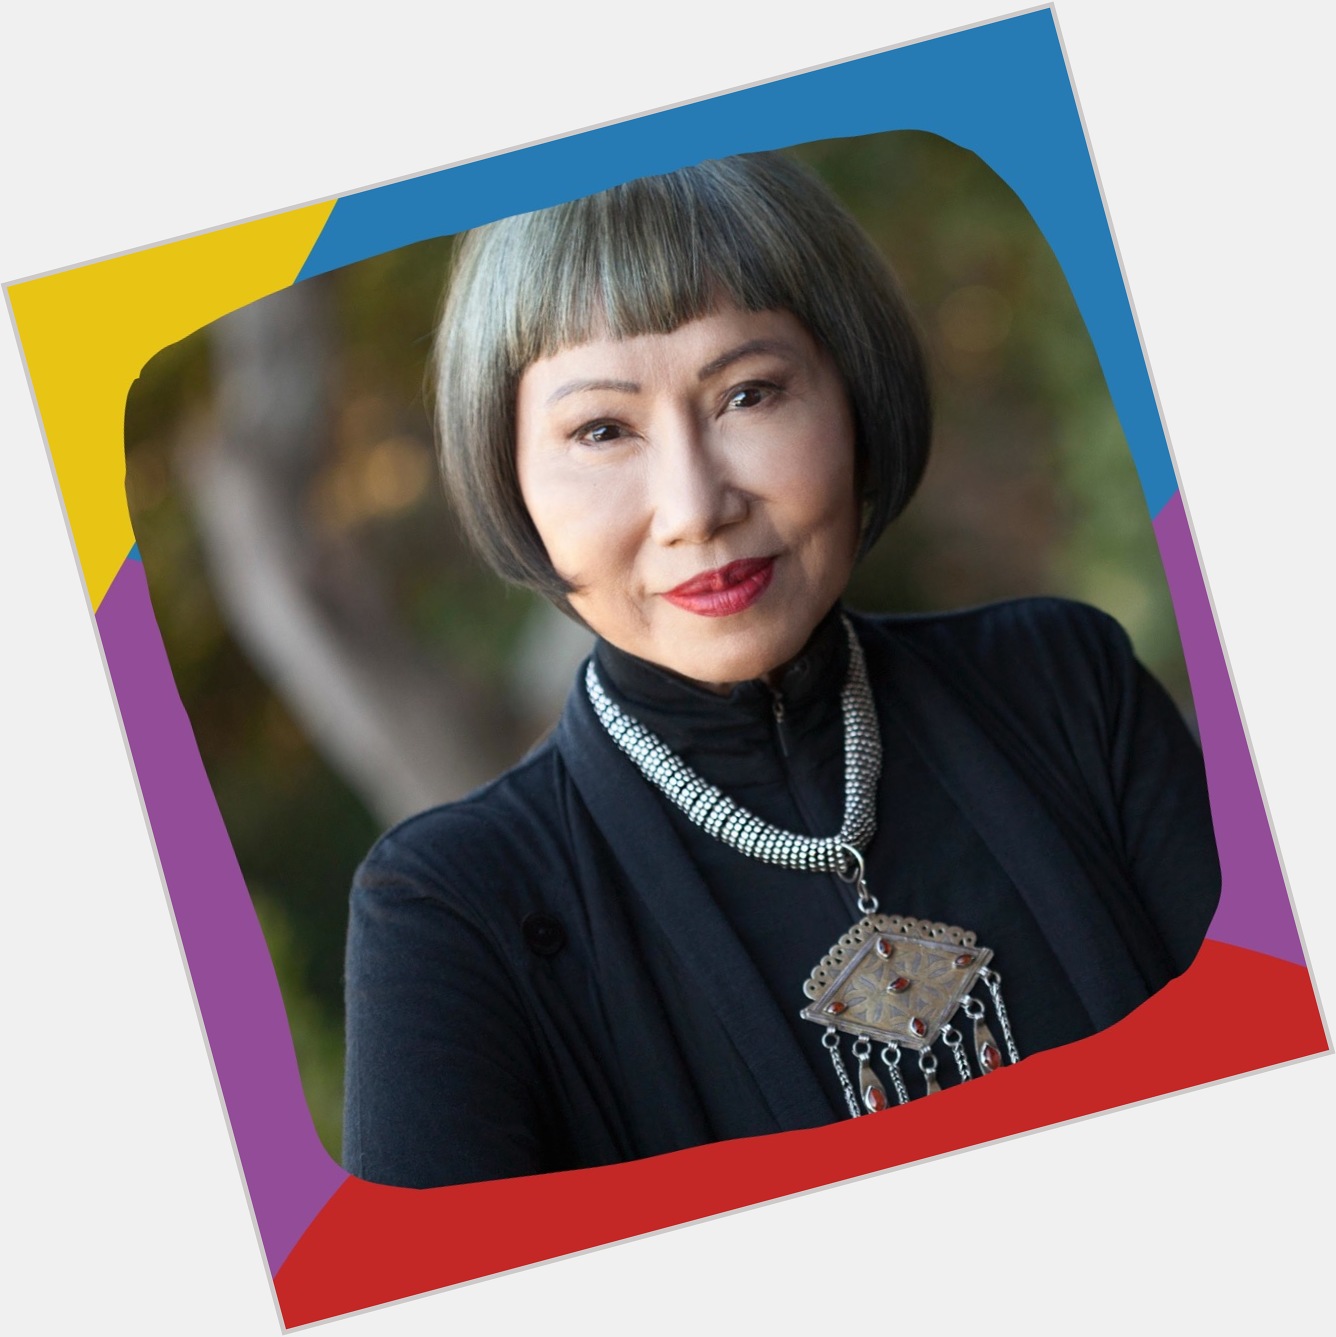 Happy birthday, Amy Tan! The Oakland-born author of The Joy Luck Club is 69 years old today. 